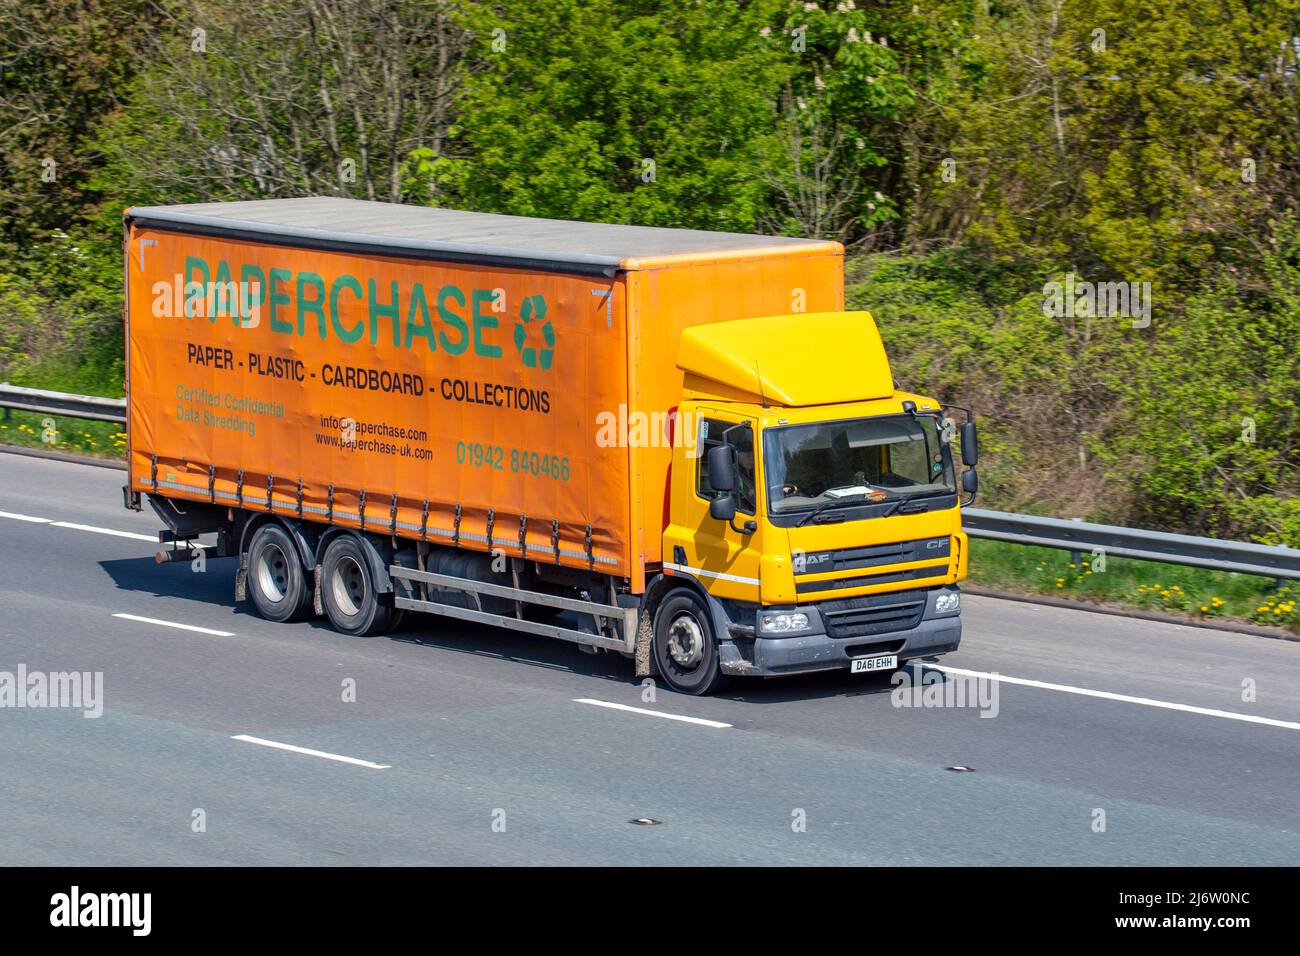 PAPERCHASE, paper, plastic, cardboard collections : Orange DAF CF Truck FAG 75.310 9200cc diesel rigid lorry; Stock Photo